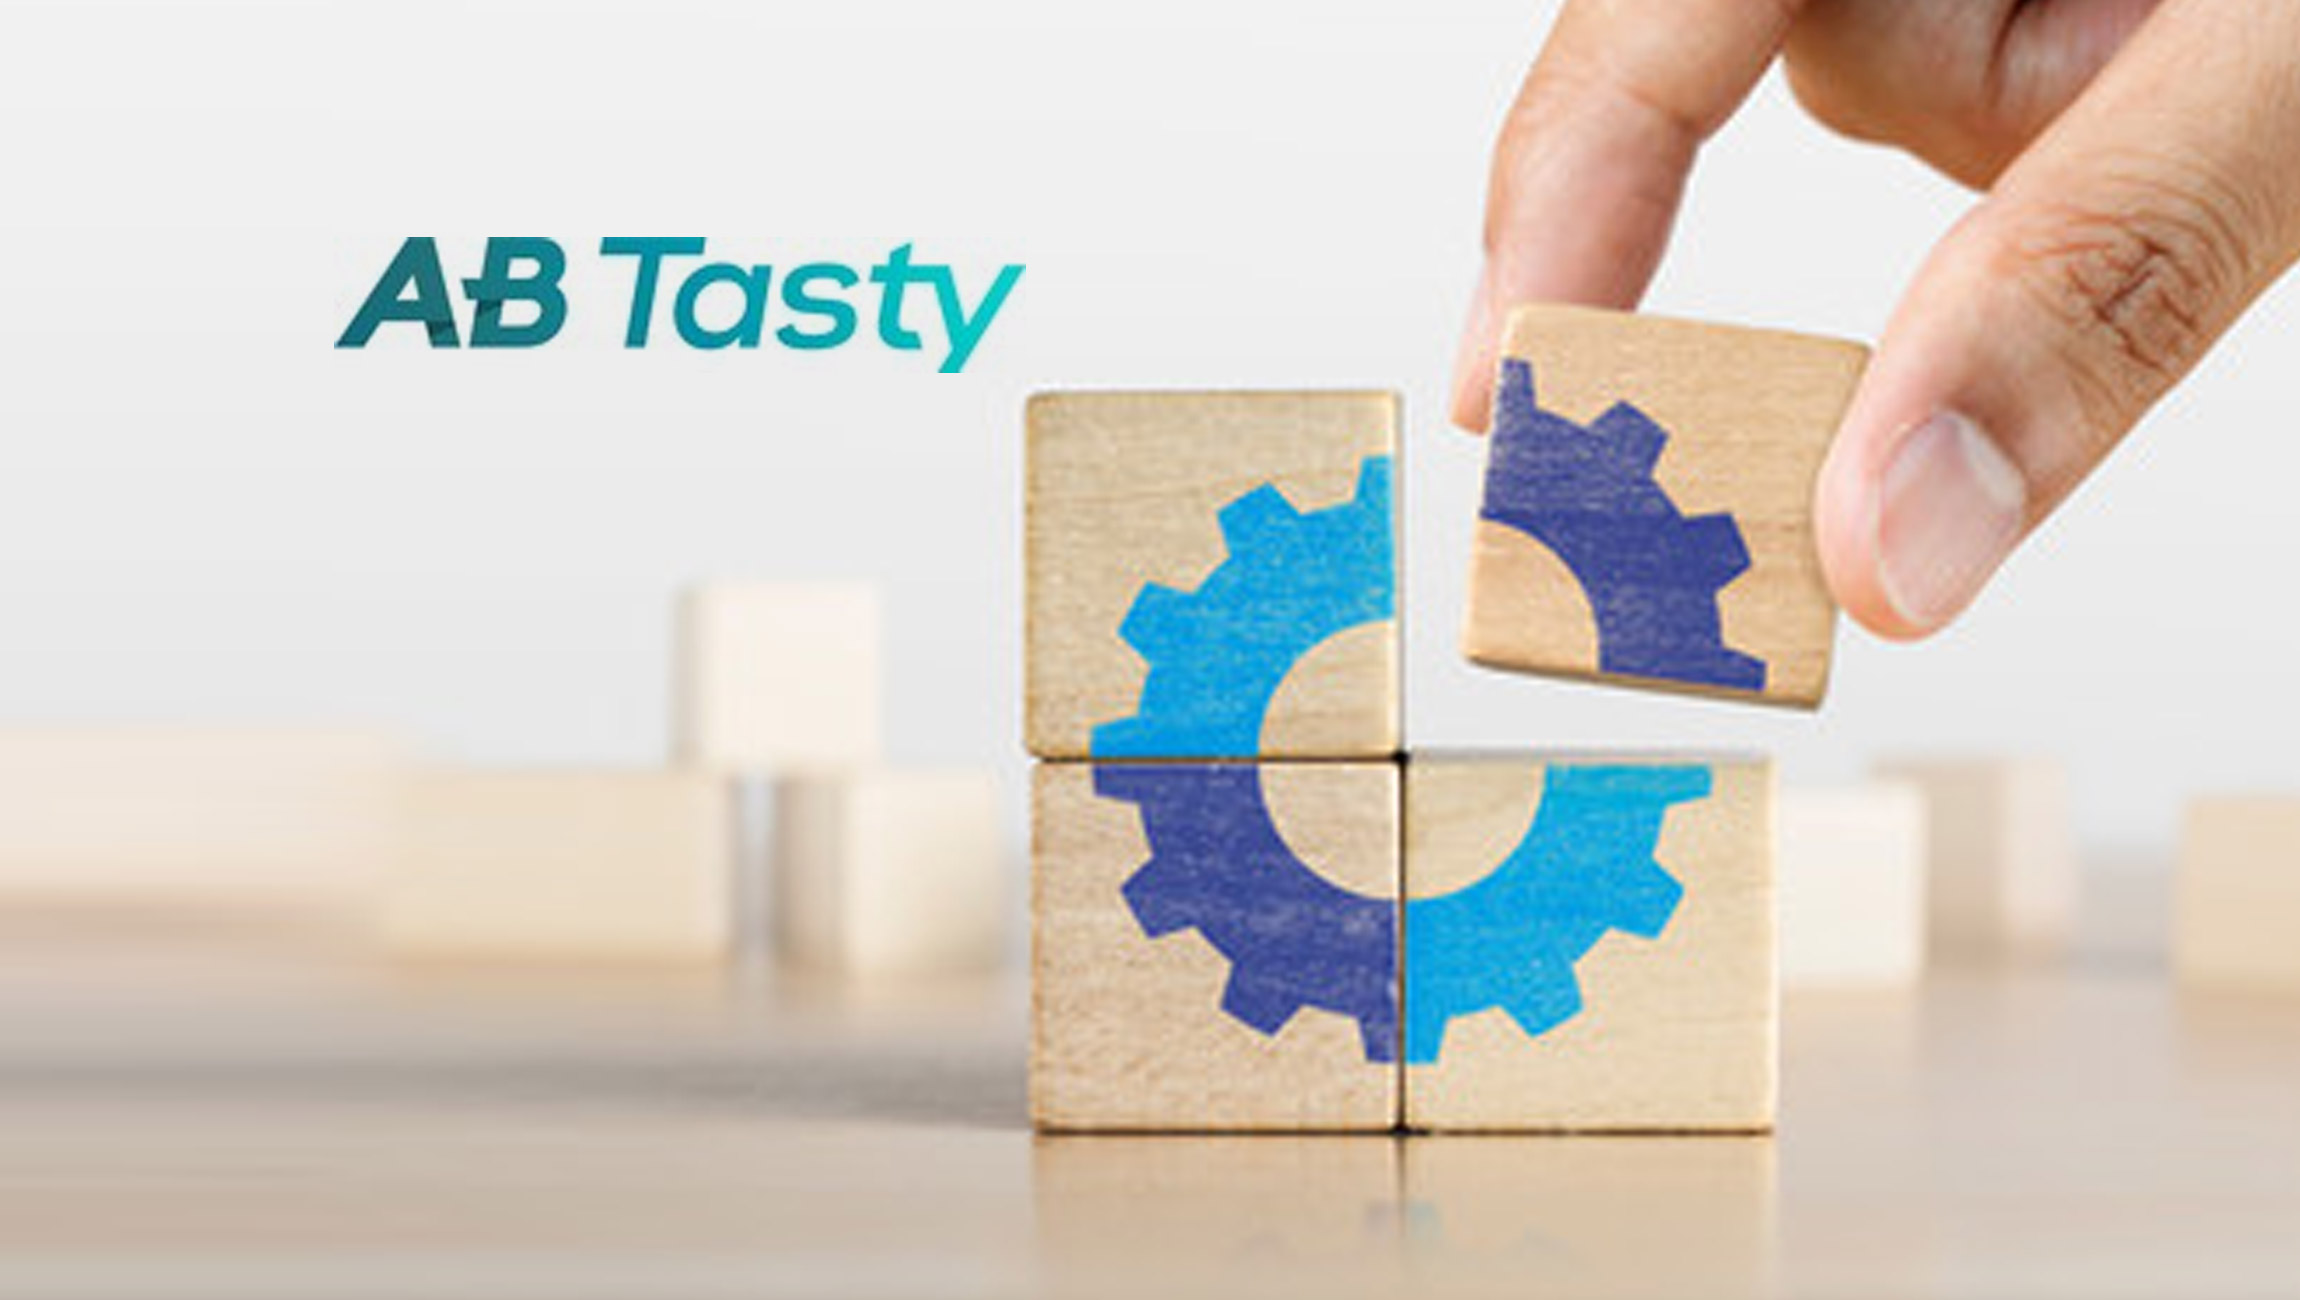 Experience-Optimization-Platform-AB-Tasty-Launches-Integration-with-Microsoft-Dynamics-365-Commerce